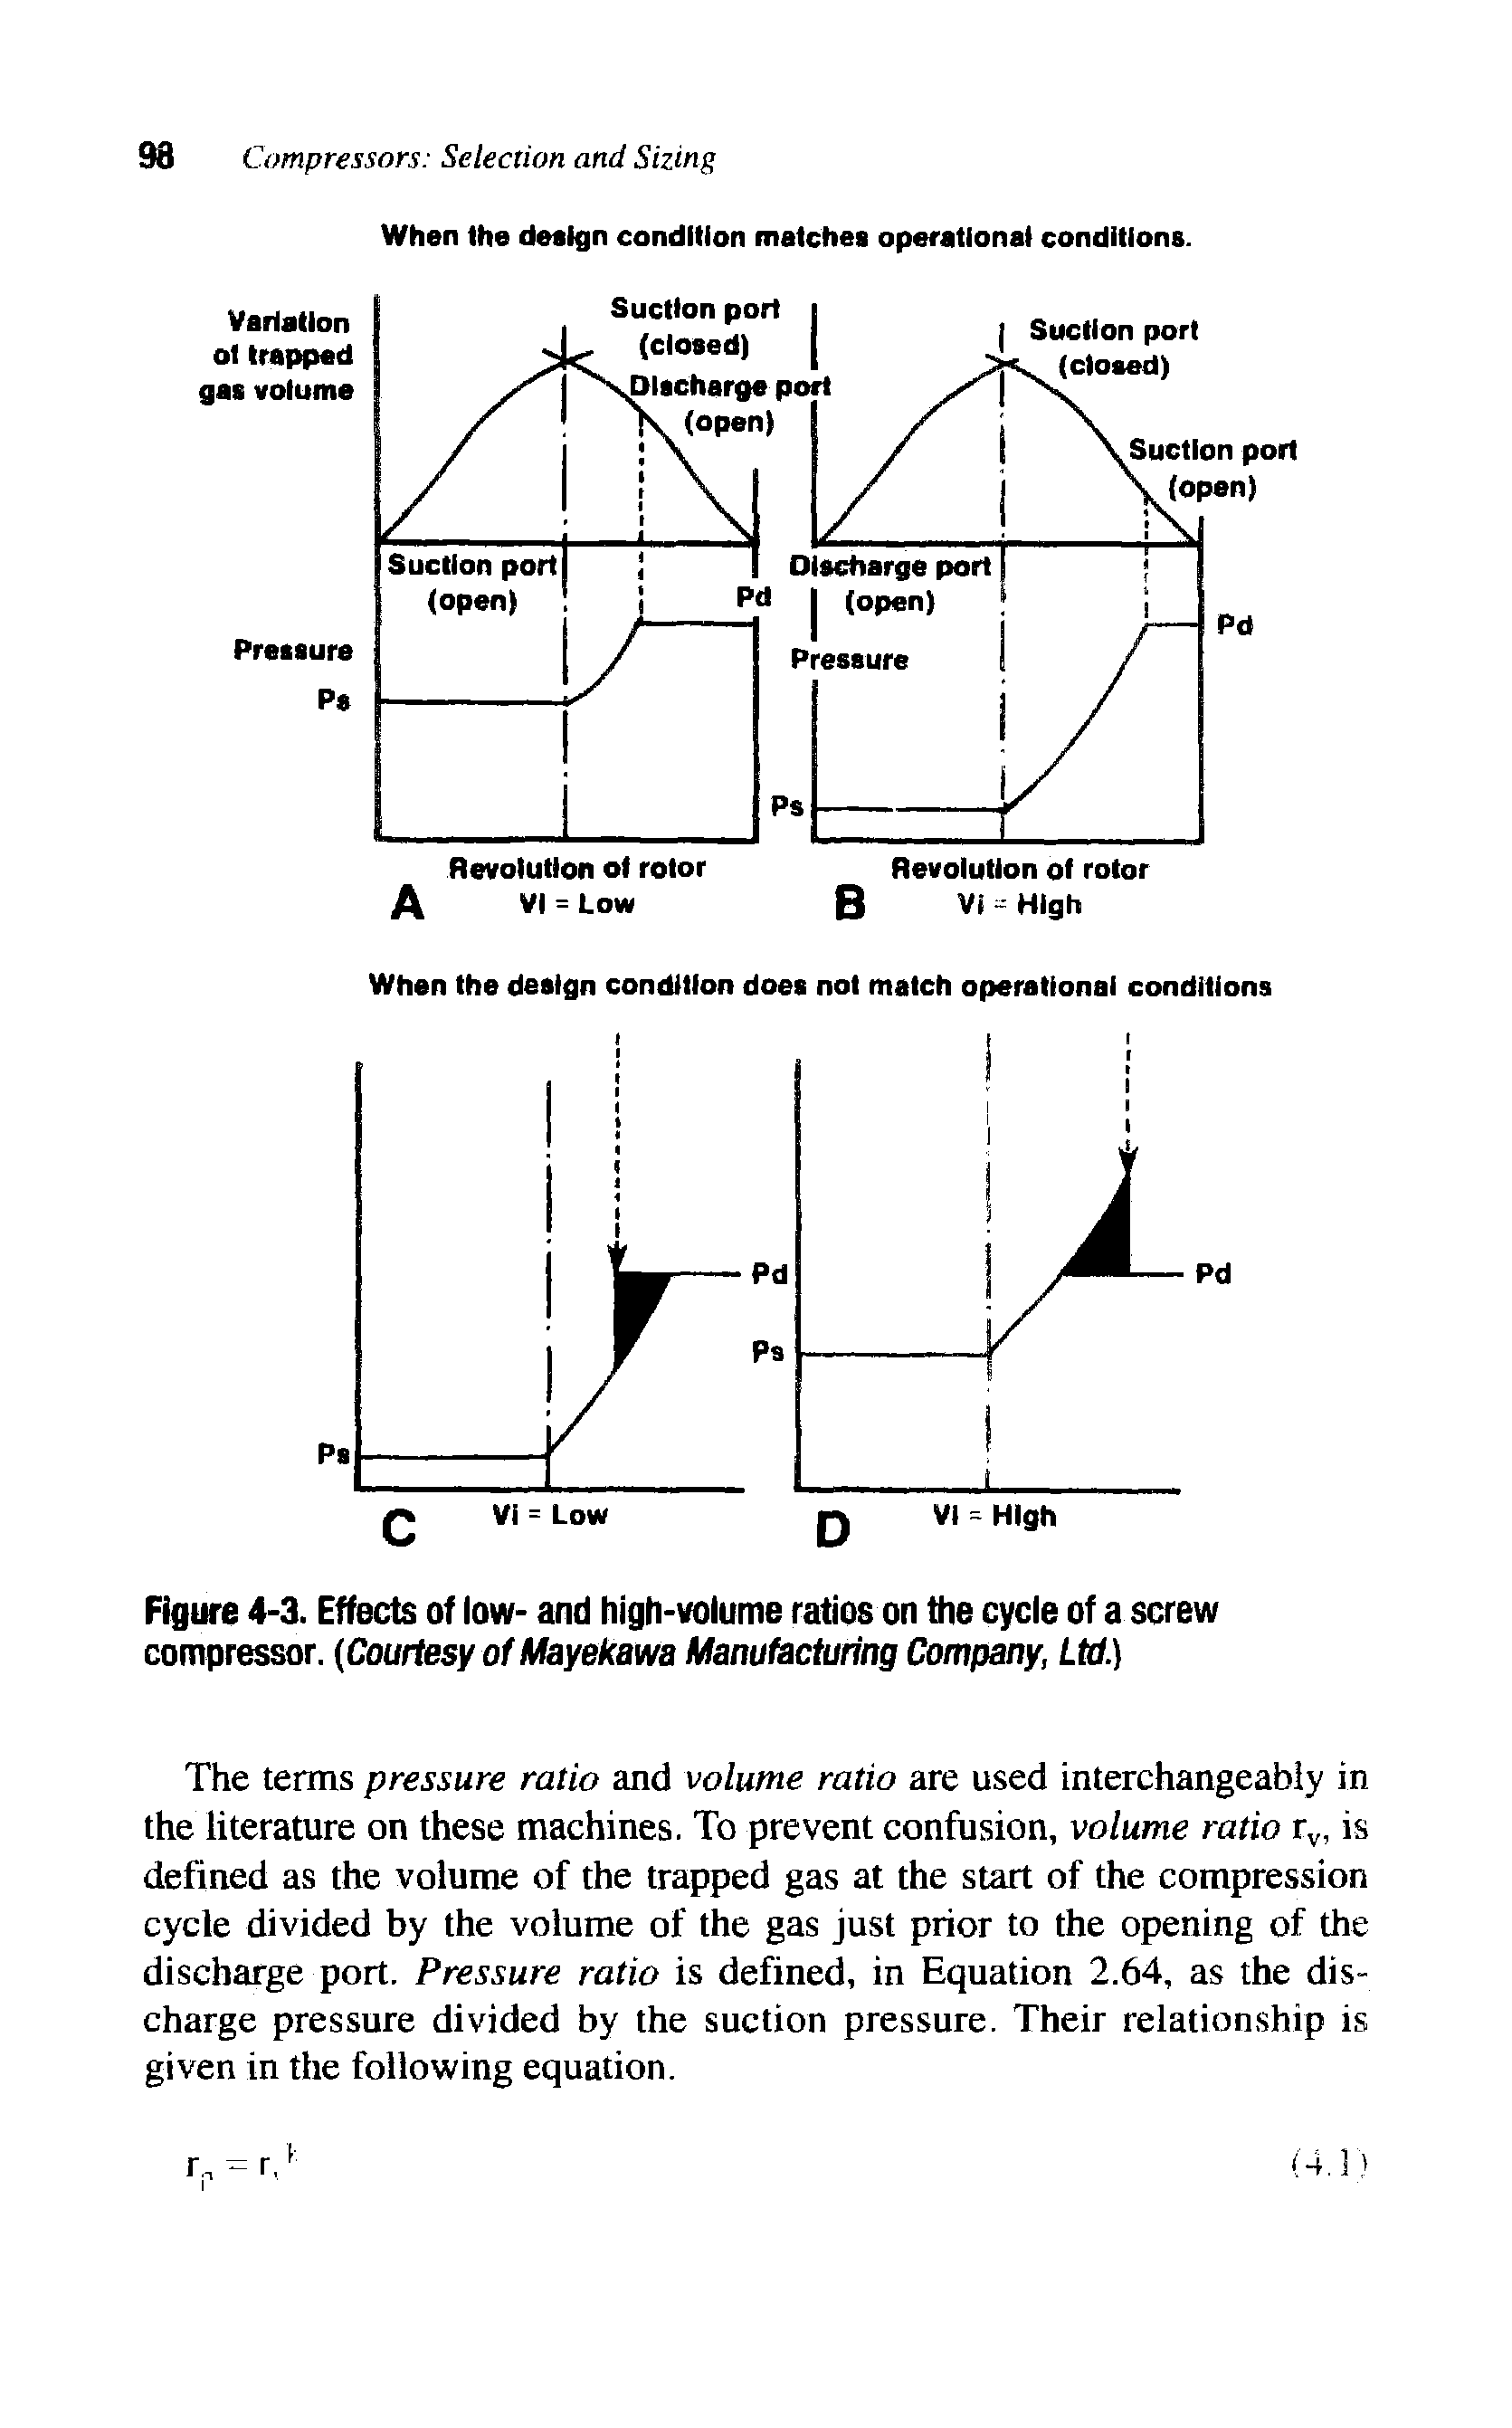 Figure 4-3. Effects of low- and high-volume ratios on the cycle of a screw compressor. Courtesy of Mayekam Manufacturing Company, Ltd.)...